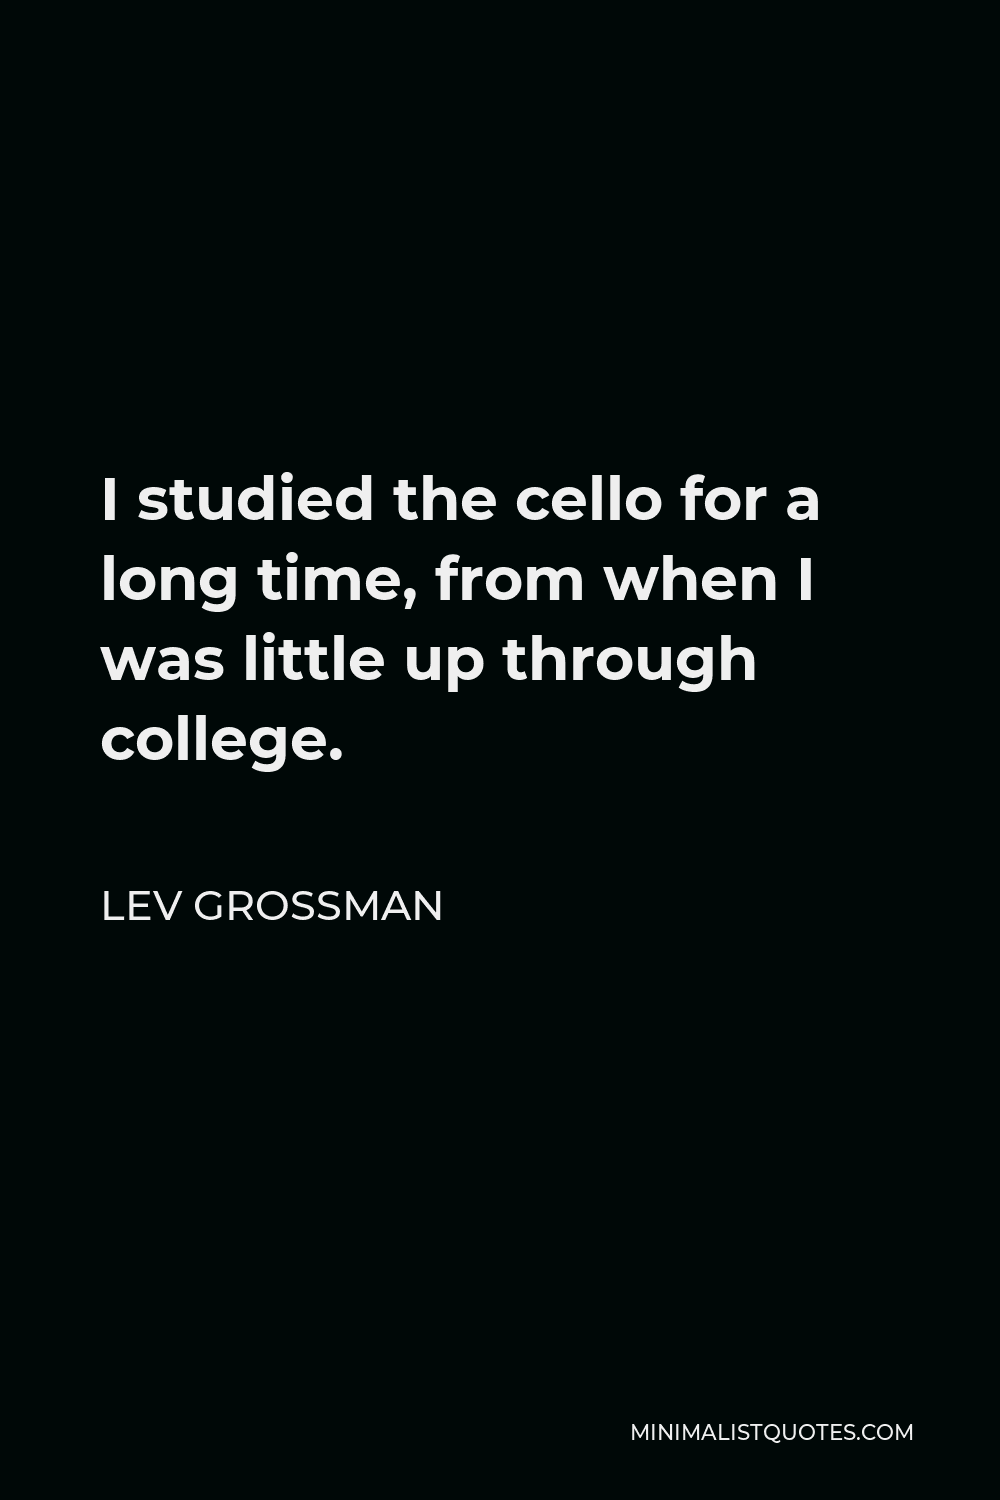 Lev Grossman Quote - I studied the cello for a long time, from when I was little up through college.